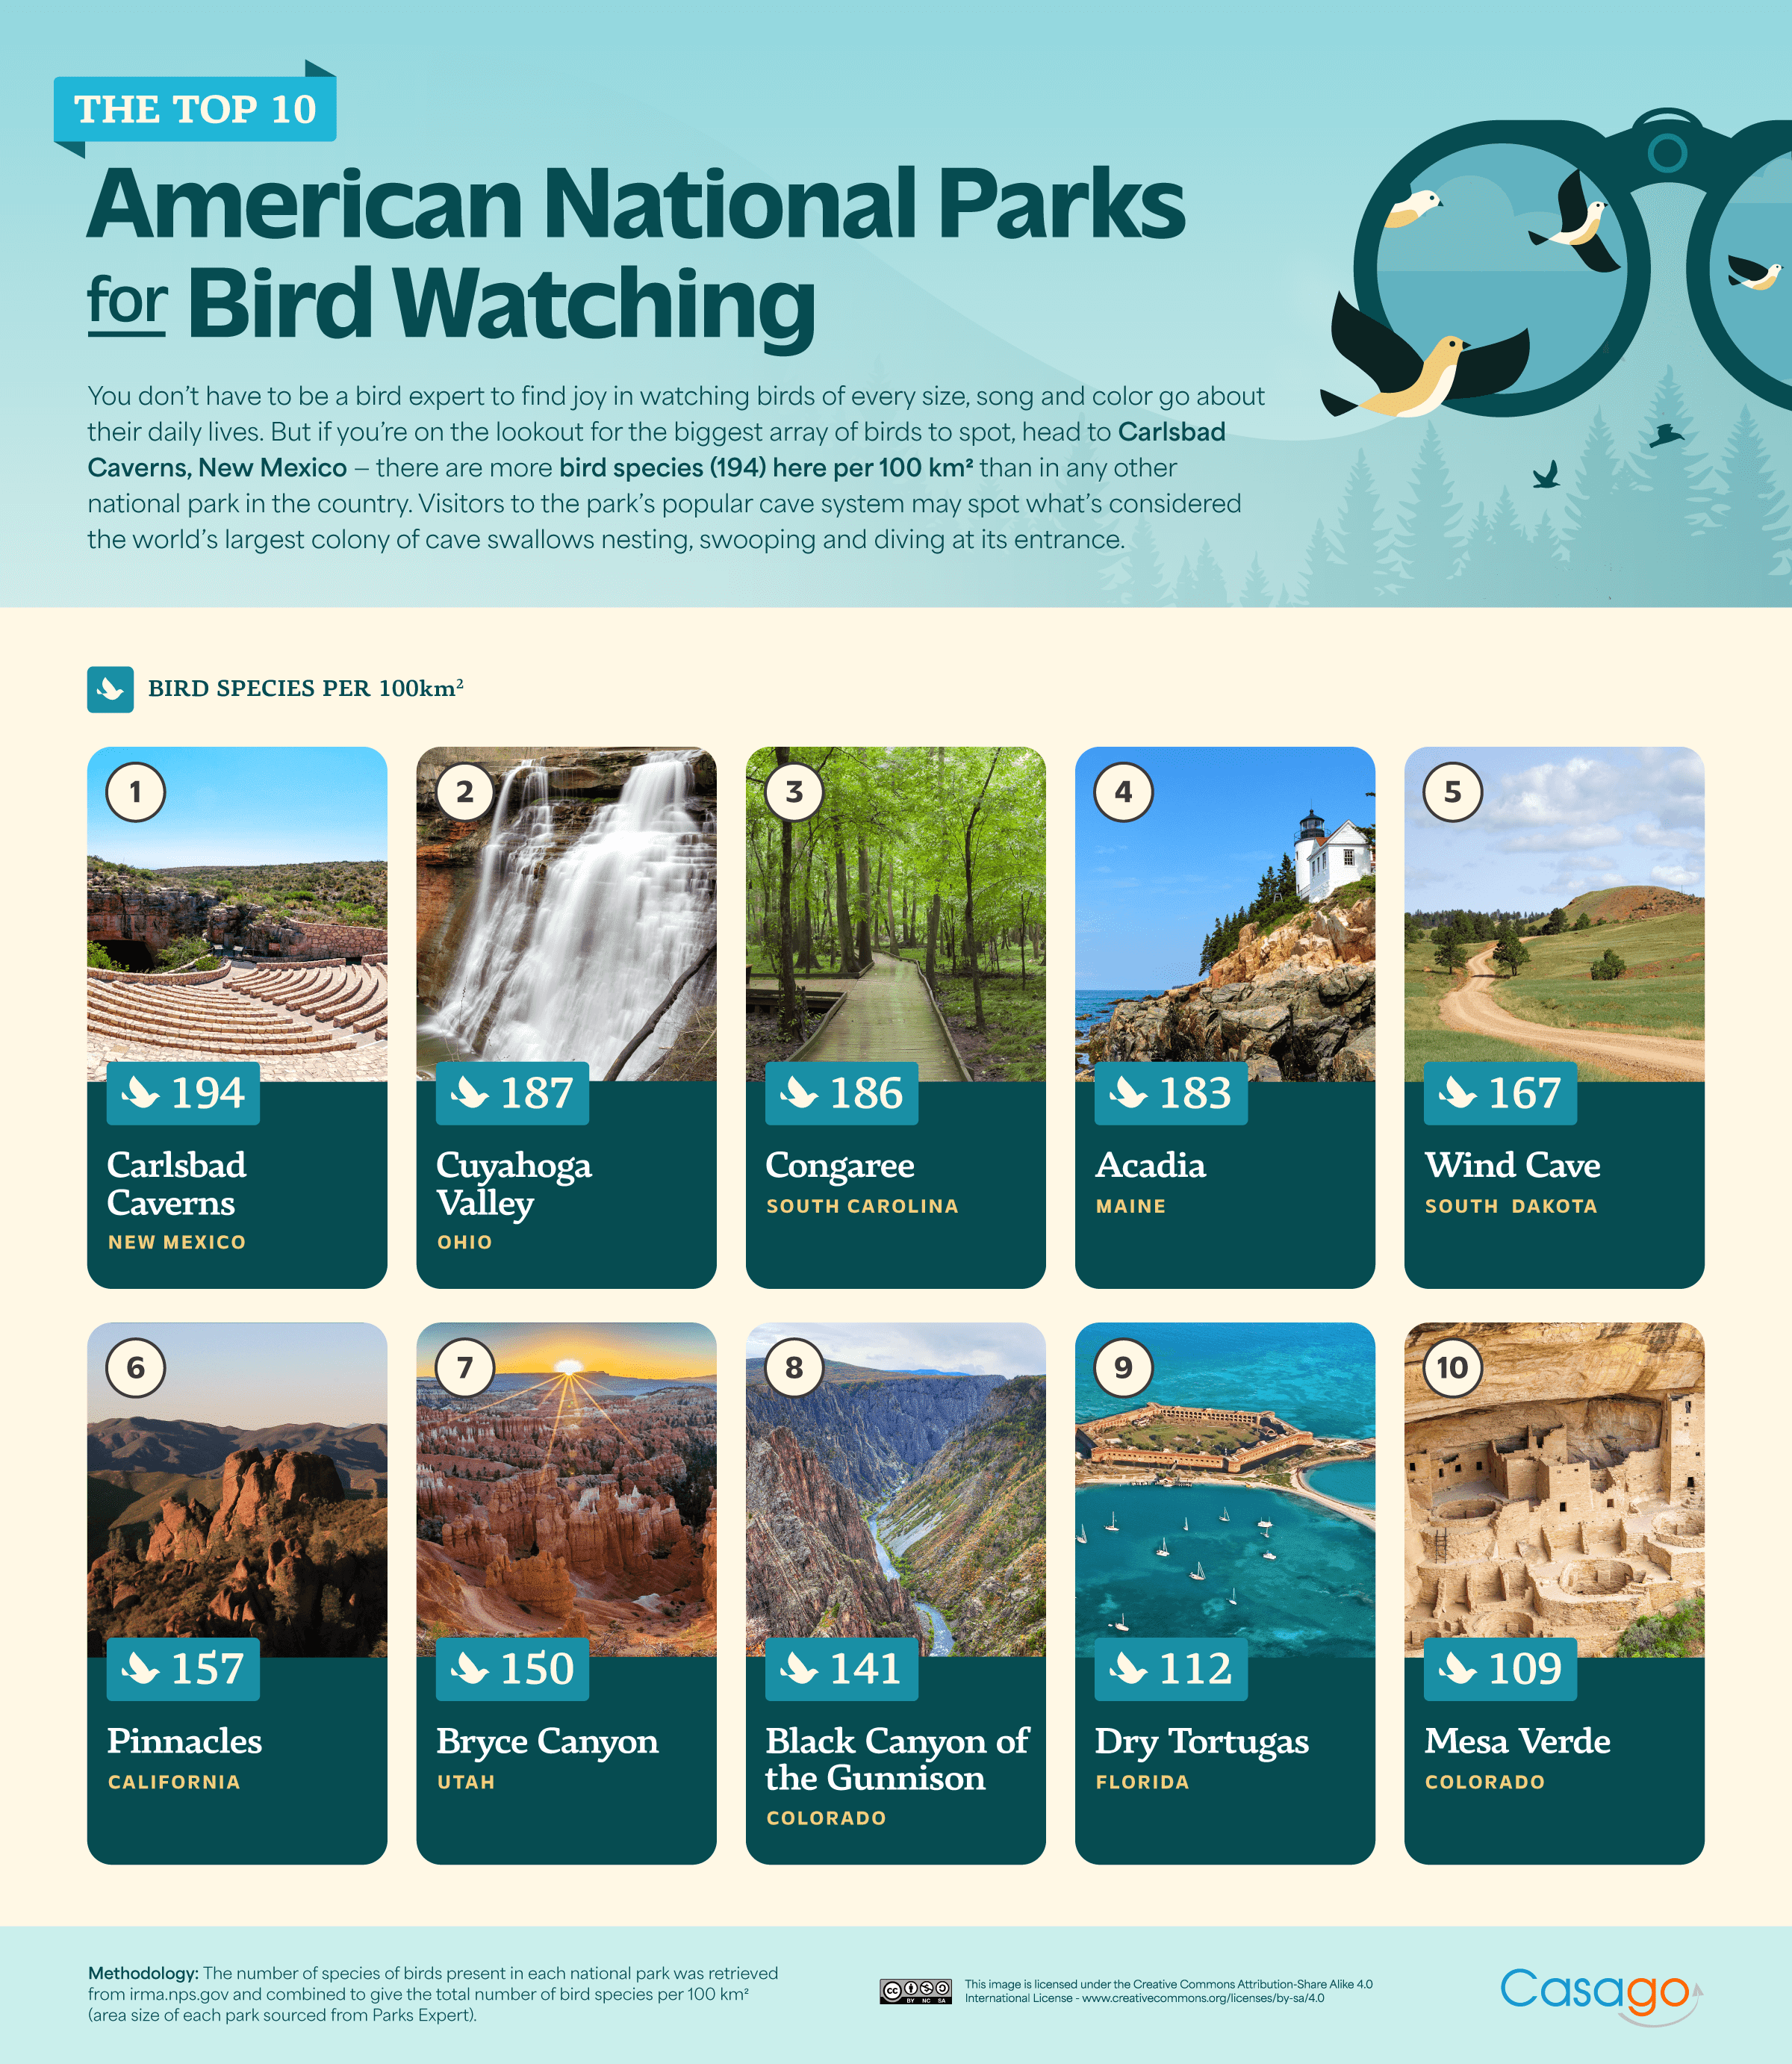 The Top 10 American National Parks for Bird Watching